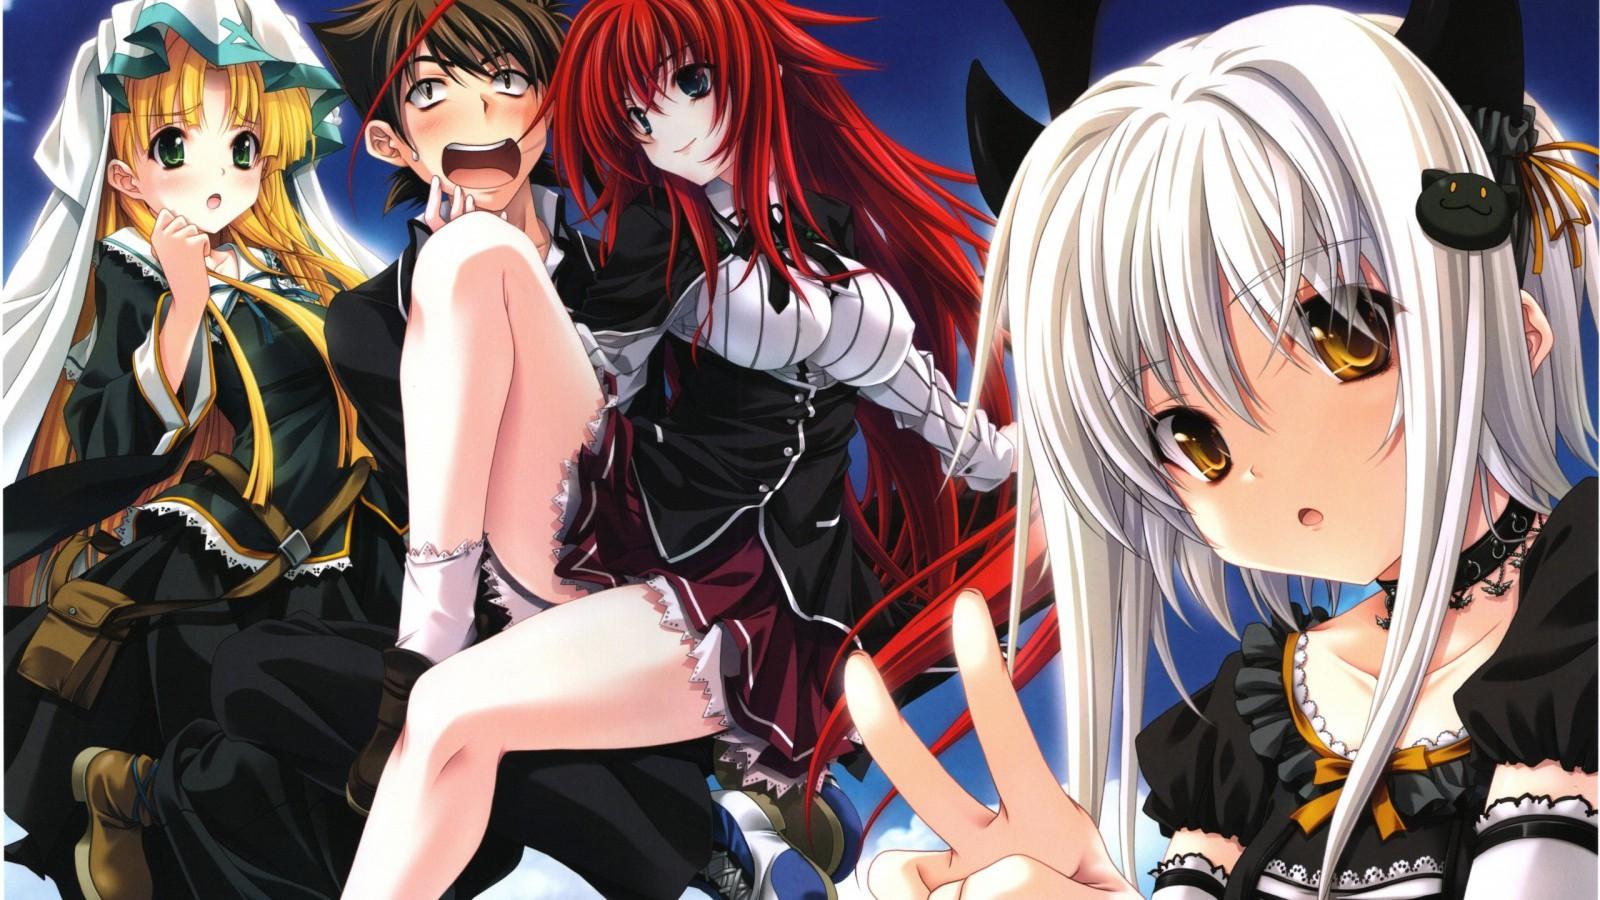 Download 1600x900 Highschool DxD Argento Asia Wallpaper